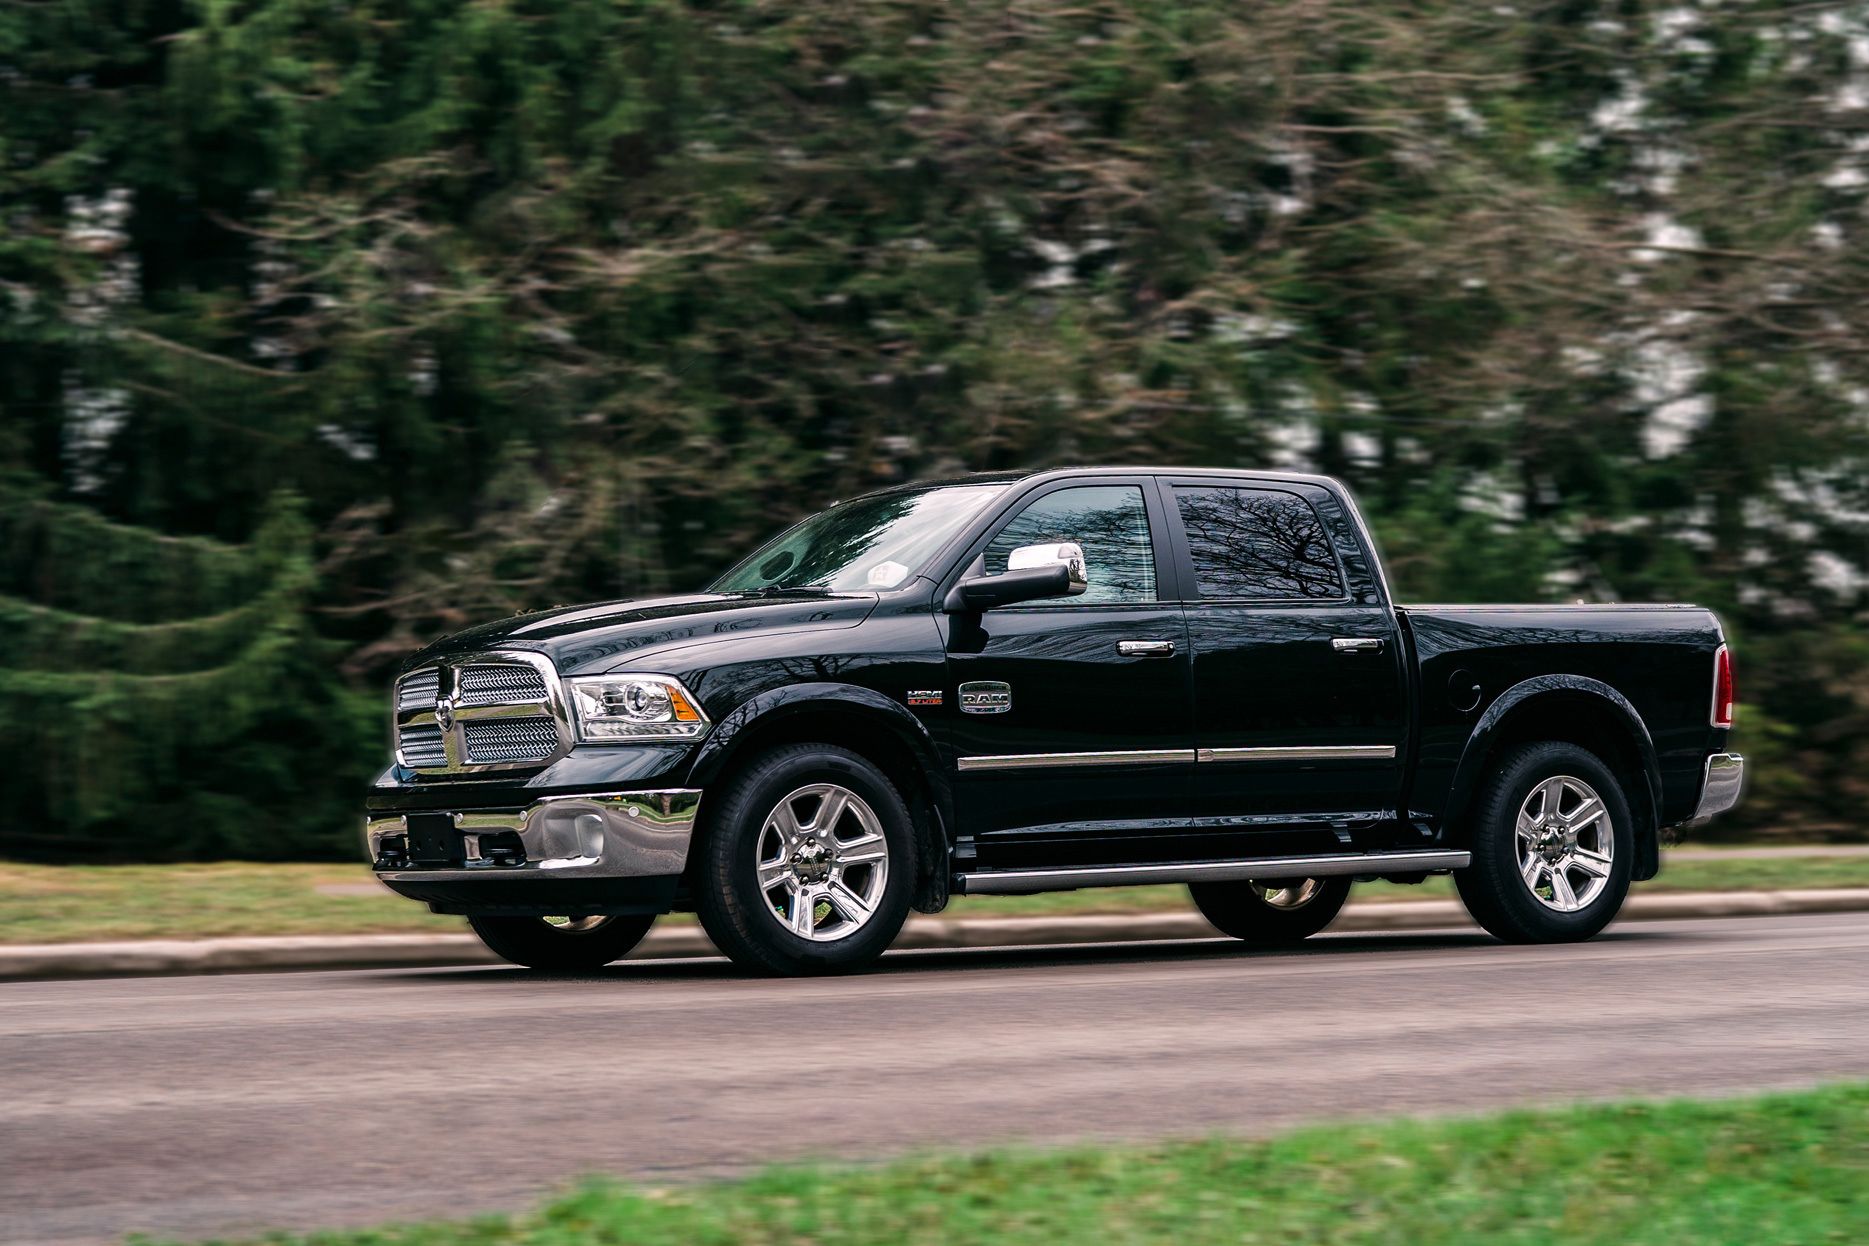 Your truck accessories – can they impact fuel consumption?